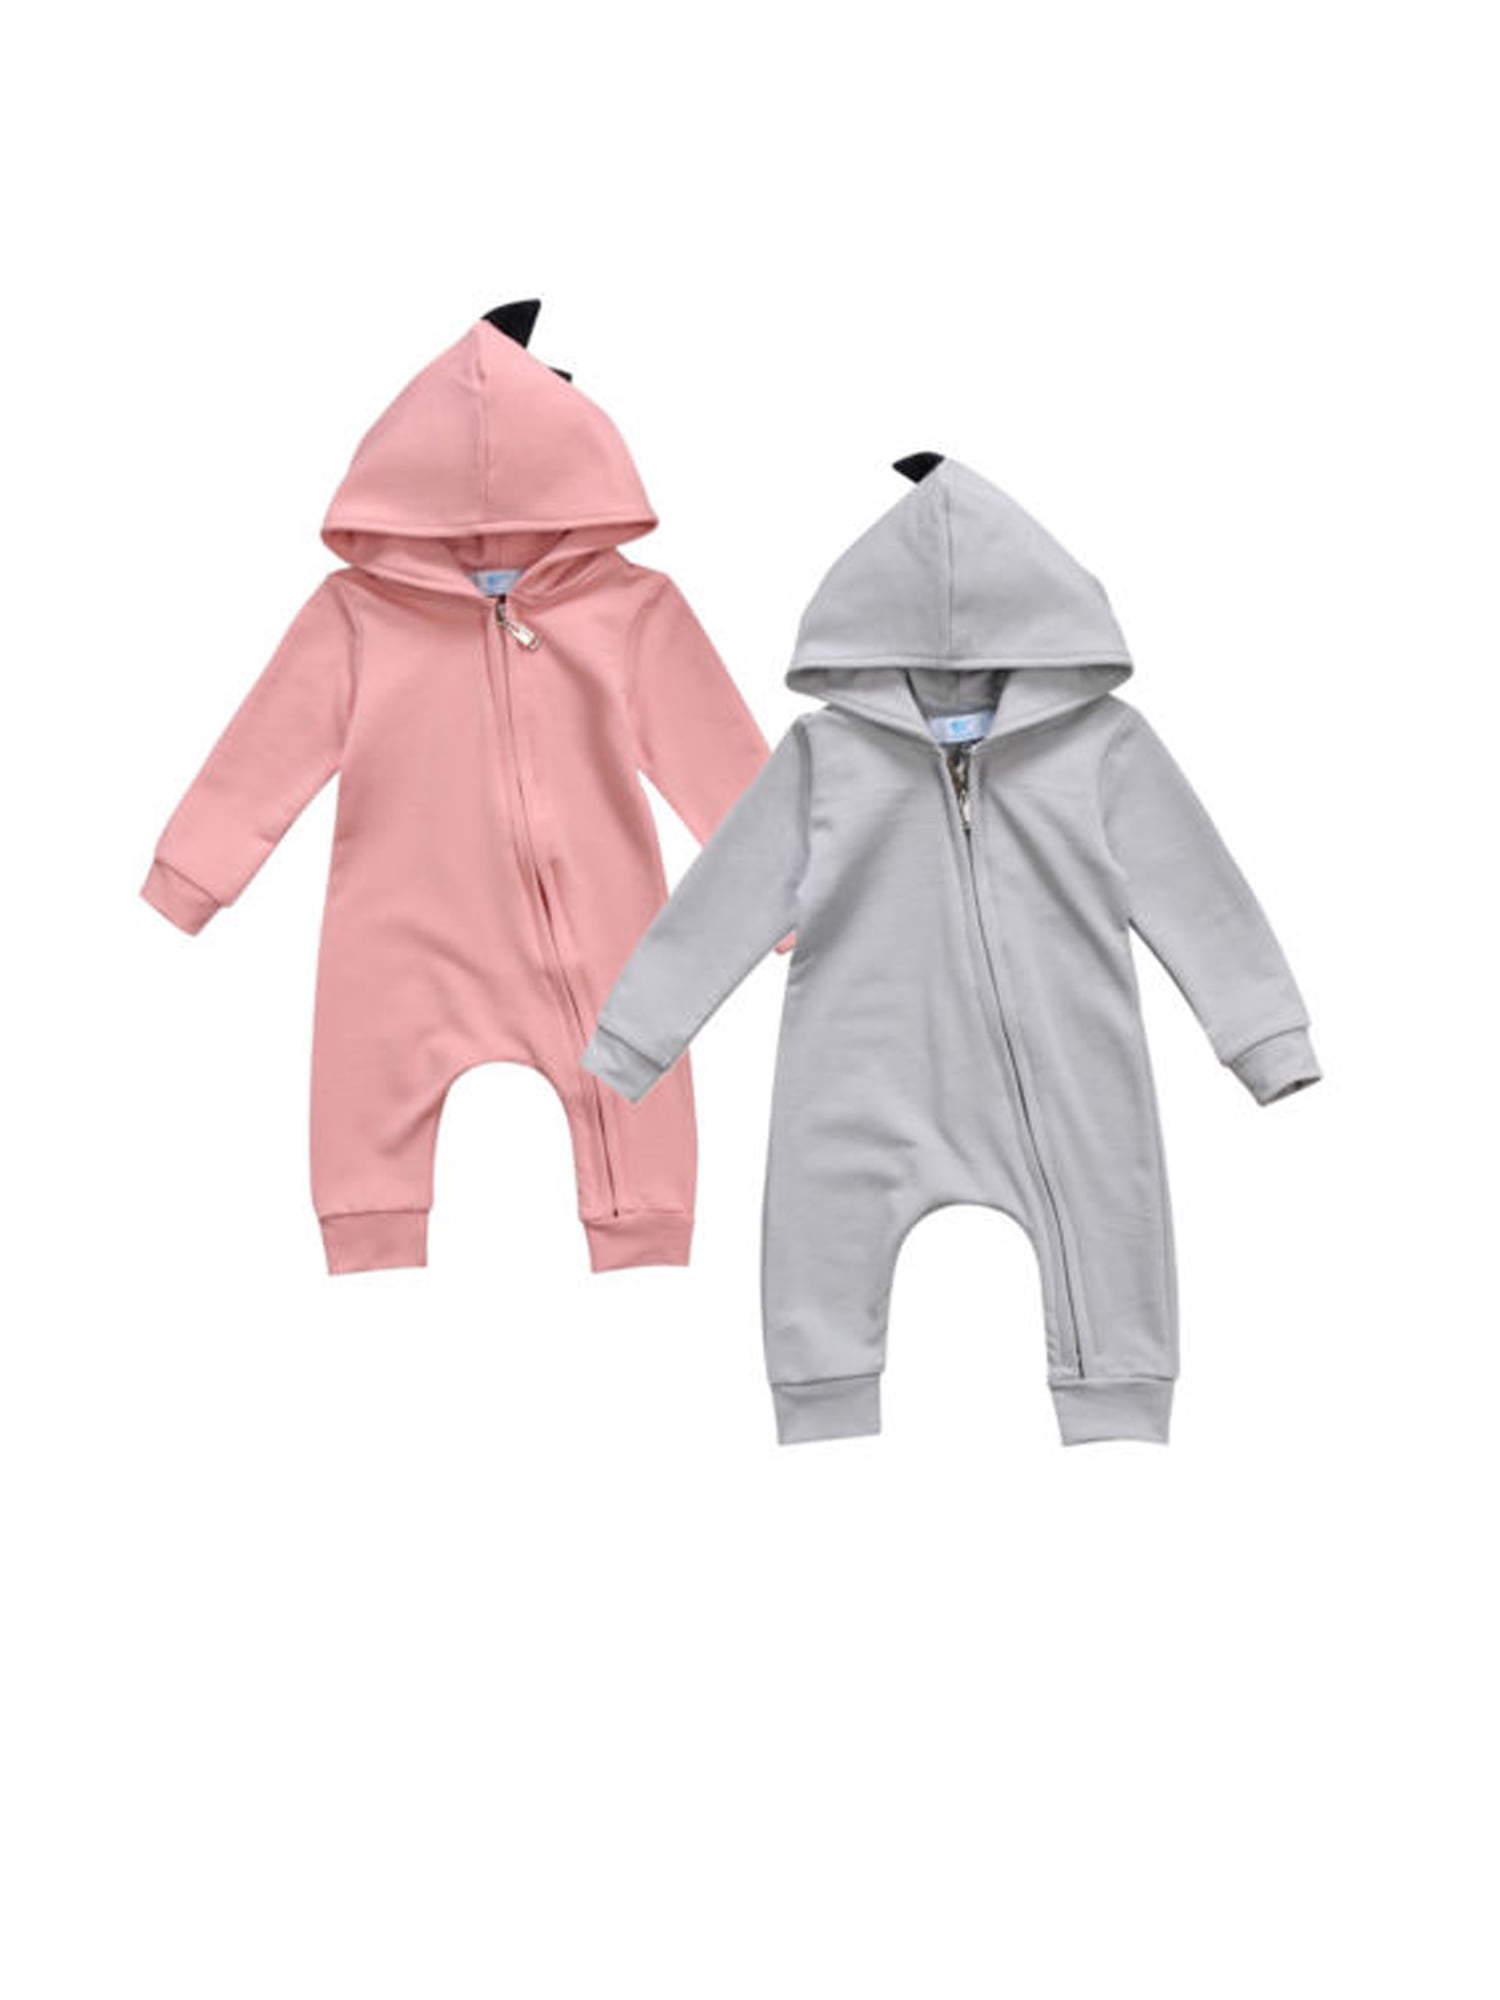 Newborn Infant Baby Boy Girl Dinosaur Hooded Romper Jumpsuit Clothes Outfit New 